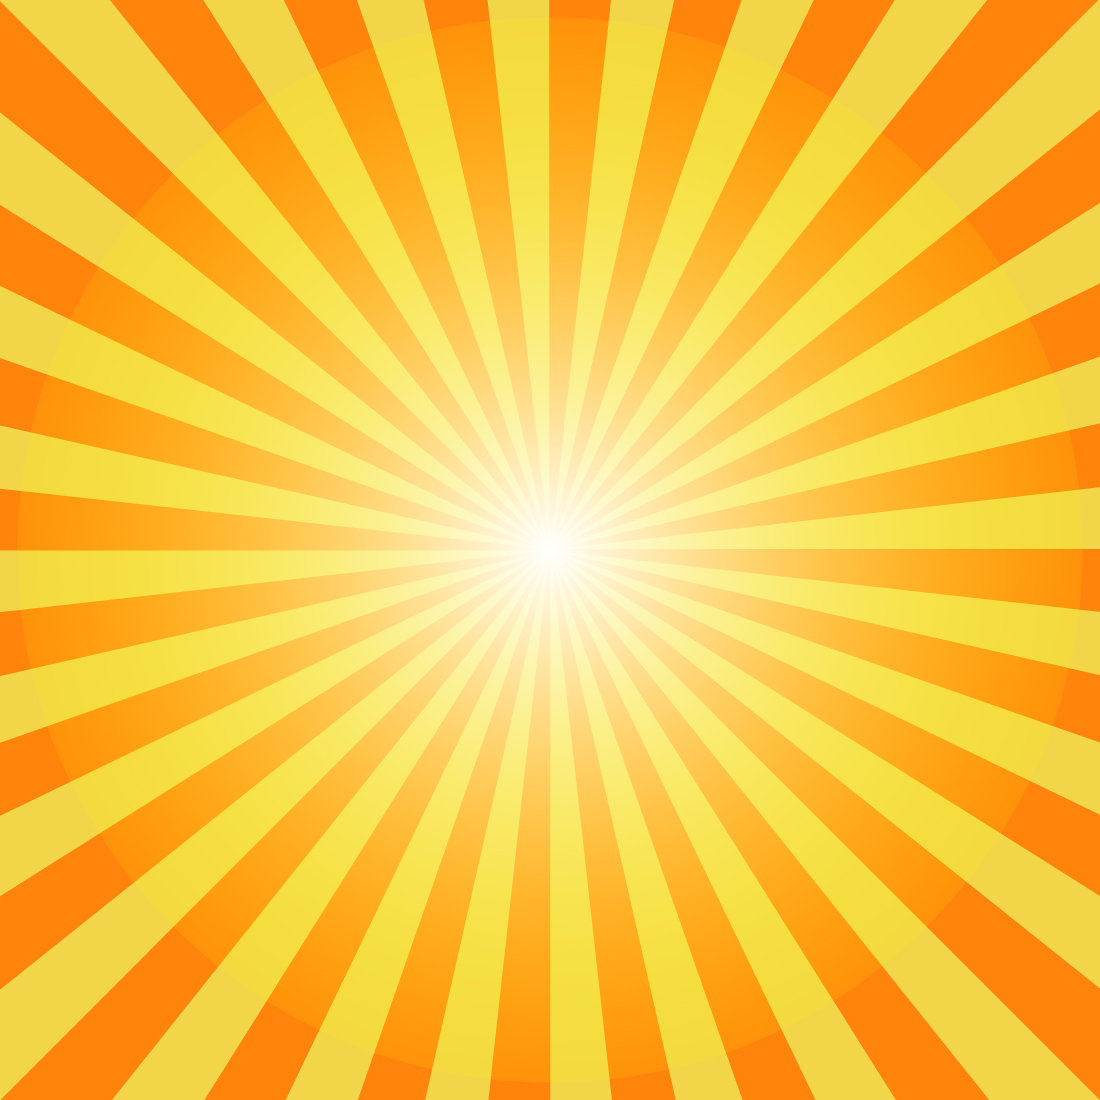 Yellow Abstract Sun Burst Background cover image.